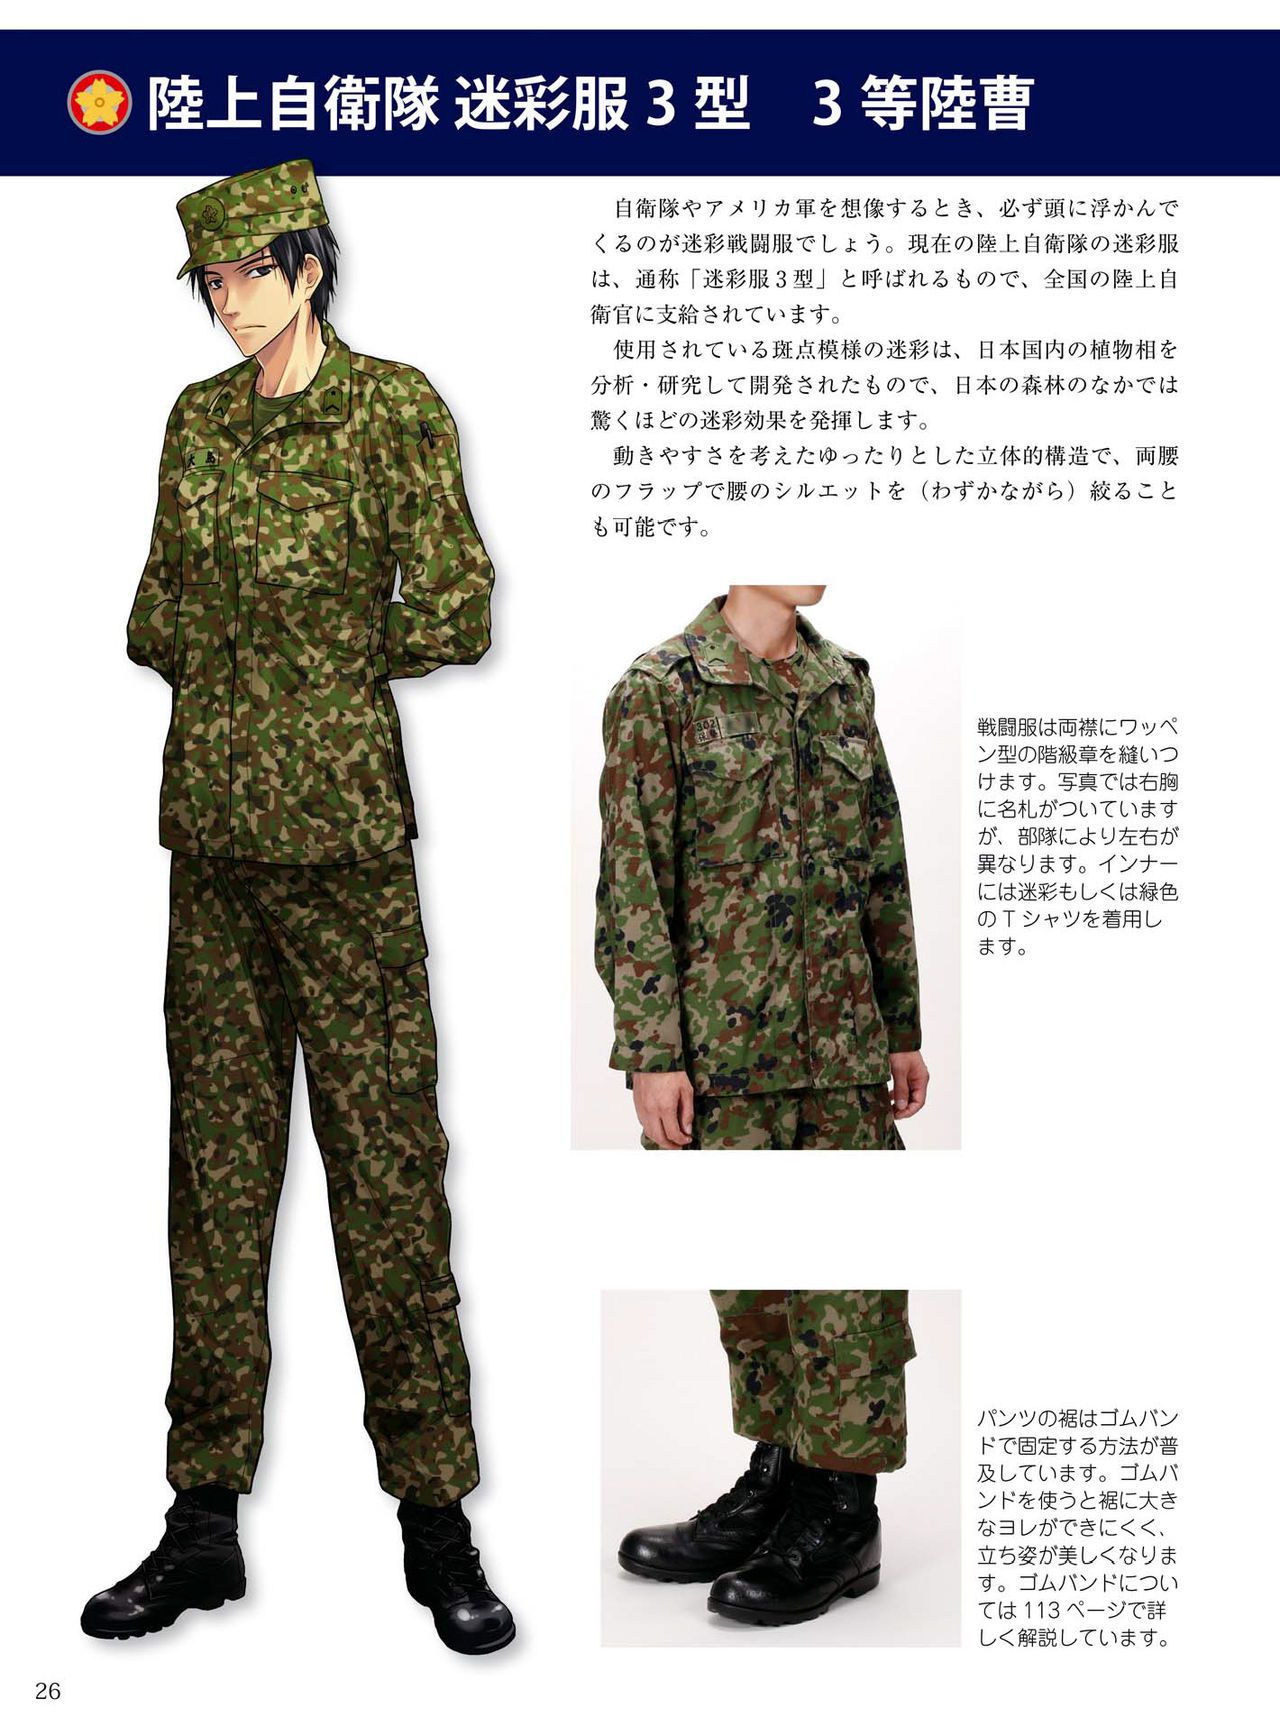 How to draw military uniforms and uniforms From Self-Defense Forces 軍服・制服の描き方 アメリカ軍・自衛隊の制服から戦闘服まで 29